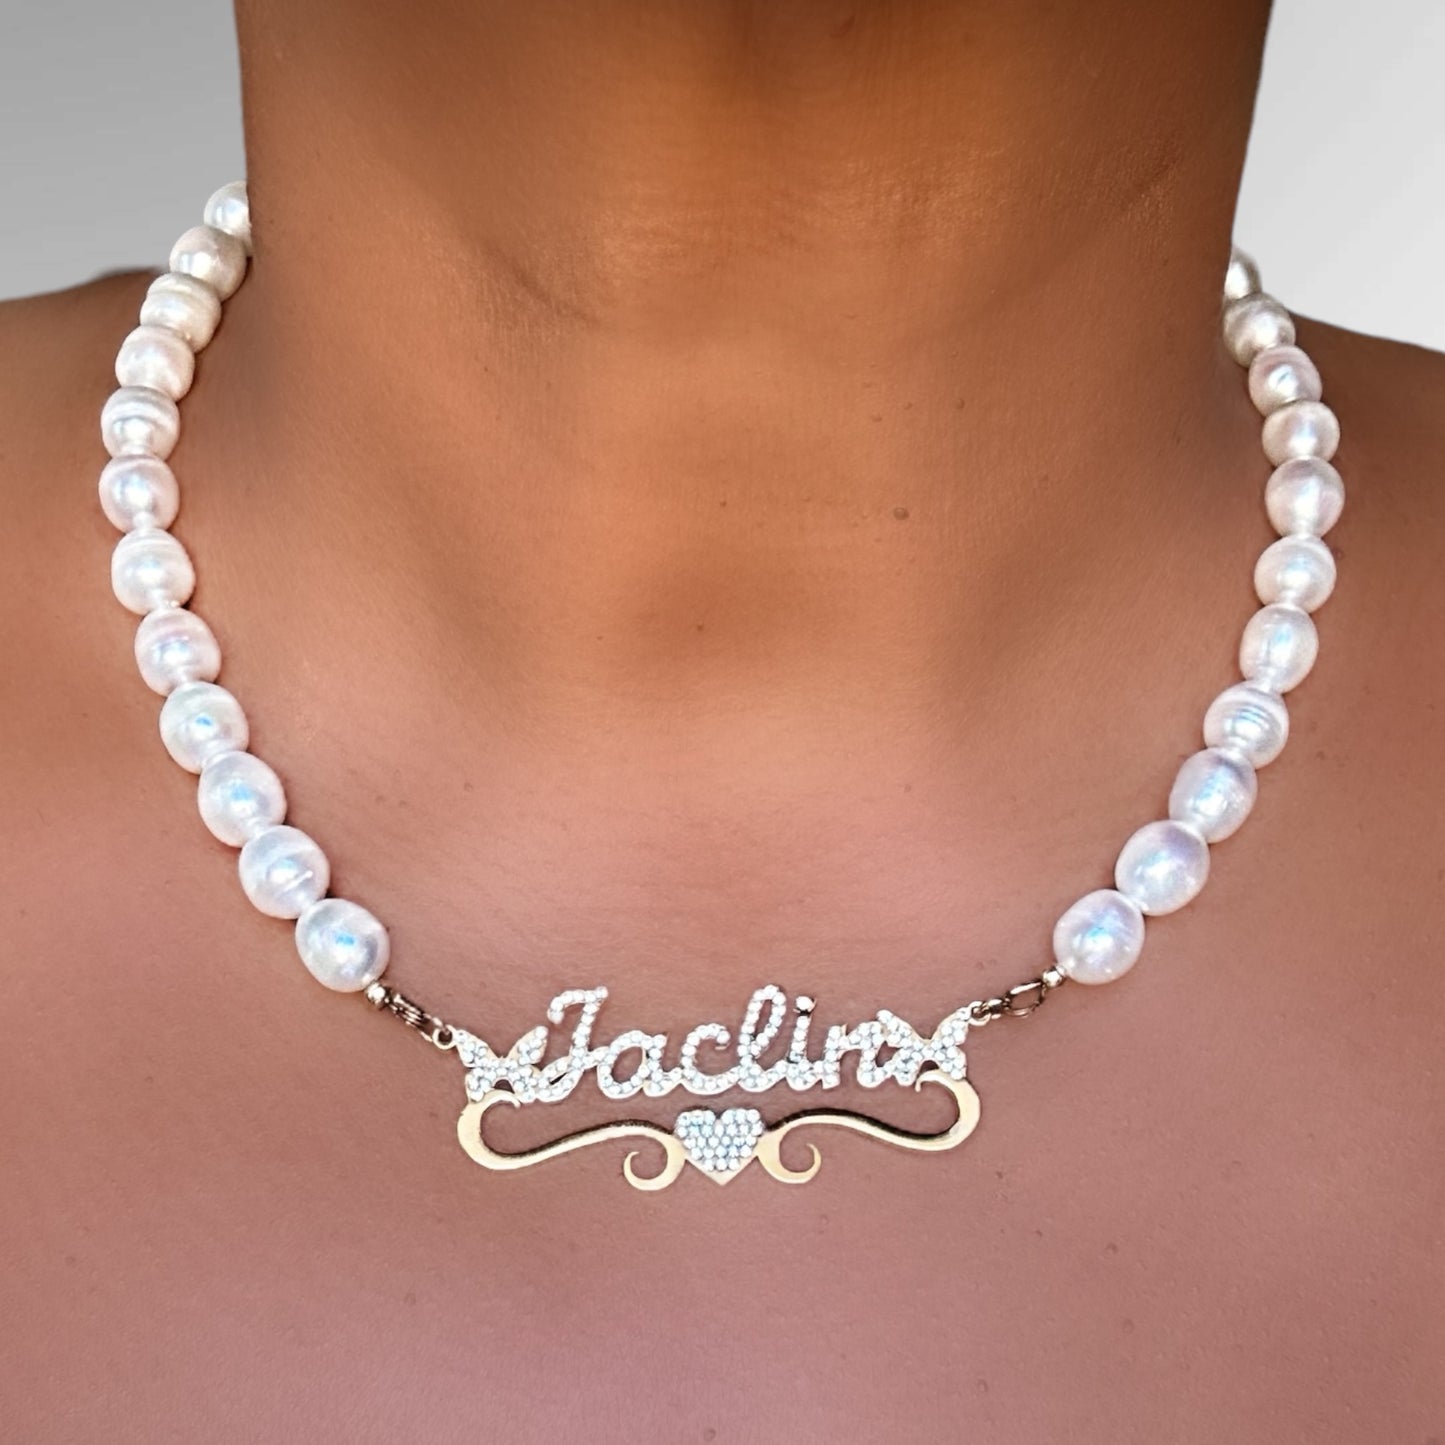 SAY MY NAME PEARL BLING NECKLACE